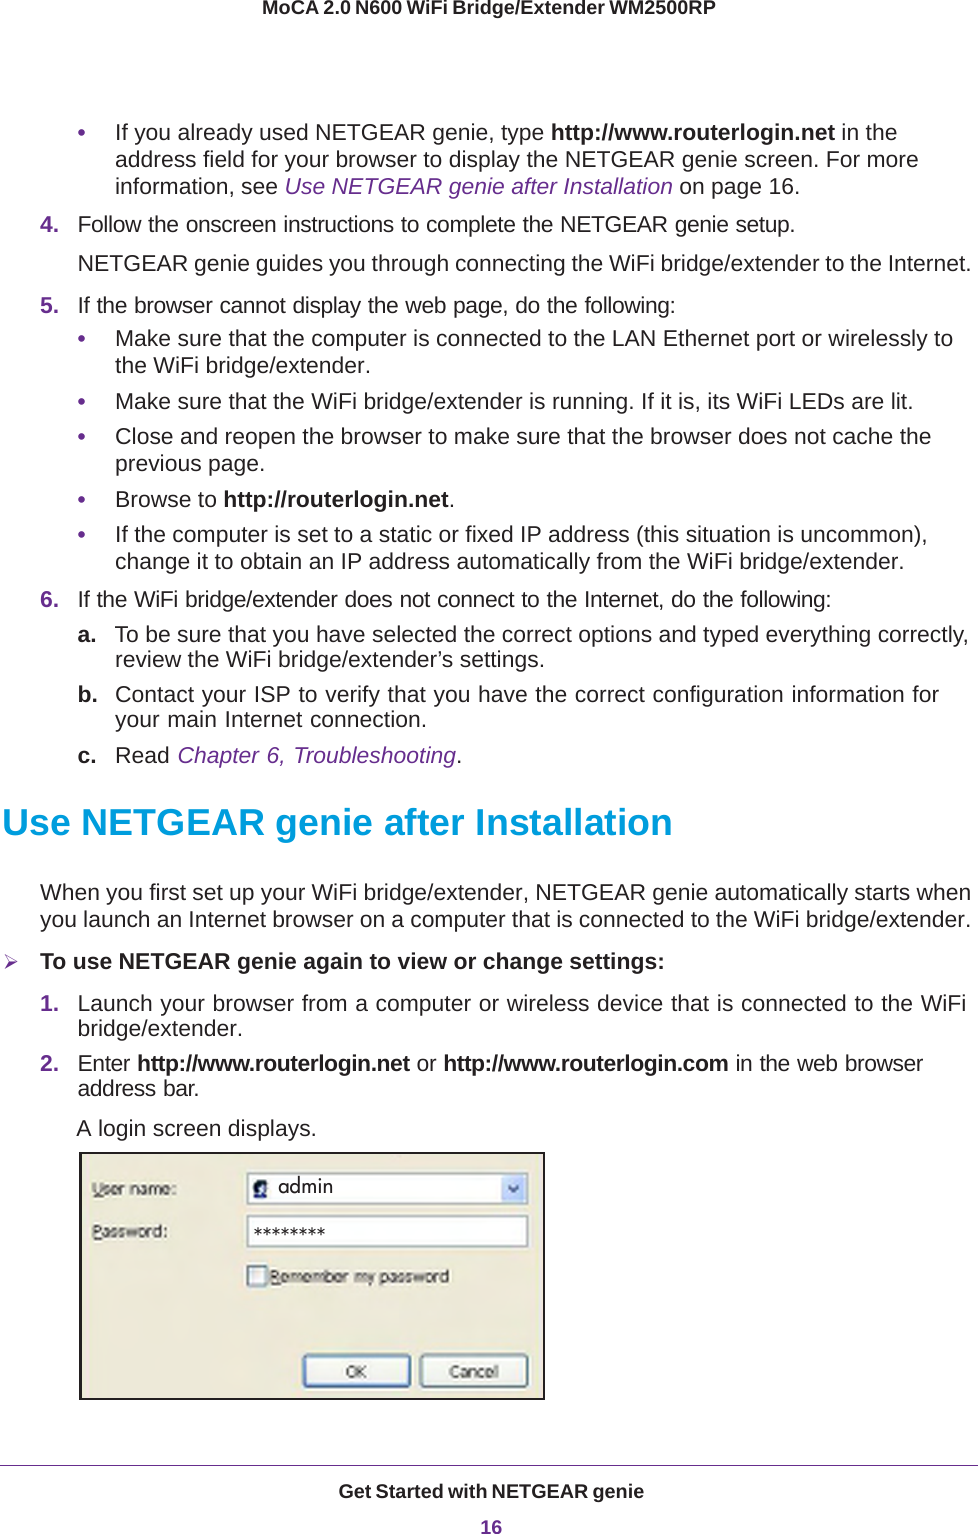 Get Started with NETGEAR genie16MoCA 2.0 N600 WiFi Bridge/Extender WM2500RP •If you already used NETGEAR genie, type http://www.routerlogin.net in the address field for your browser to display the NETGEAR genie screen. For more information, see Use NETGEAR genie after Installation on page  16.4. Follow the onscreen instructions to complete the NETGEAR genie setup.NETGEAR genie guides you through connecting the WiFi bridge/extender to the Internet. 5. If the browser cannot display the web page, do the following: •Make sure that the computer is connected to the LAN Ethernet port or wirelessly to the WiFi bridge/extender.•Make sure that the WiFi bridge/extender is running. If it is, its WiFi LEDs are lit.•Close and reopen the browser to make sure that the browser does not cache the previous page.•Browse to http://routerlogin.net.•If the computer is set to a static or fixed IP address (this situation is uncommon), change it to obtain an IP address automatically from the WiFi bridge/extender.6. If the WiFi bridge/extender does not connect to the Internet, do the following:a. To be sure that you have selected the correct options and typed everything correctly, review the WiFi bridge/extender’s settings.b. Contact your ISP to verify that you have the correct configuration information for your main Internet connection.c. Read Chapter 6, Troubleshooting. Use NETGEAR genie after InstallationWhen you first set up your WiFi bridge/extender, NETGEAR genie automatically starts when you launch an Internet browser on a computer that is connected to the WiFi bridge/extender. To use NETGEAR genie again to view or change settings:1. Launch your browser from a computer or wireless device that is connected to the WiFi bridge/extender.2. Enter http://www.routerlogin.net or http://www.routerlogin.com in the web browser address bar.A login screen displays.admin********